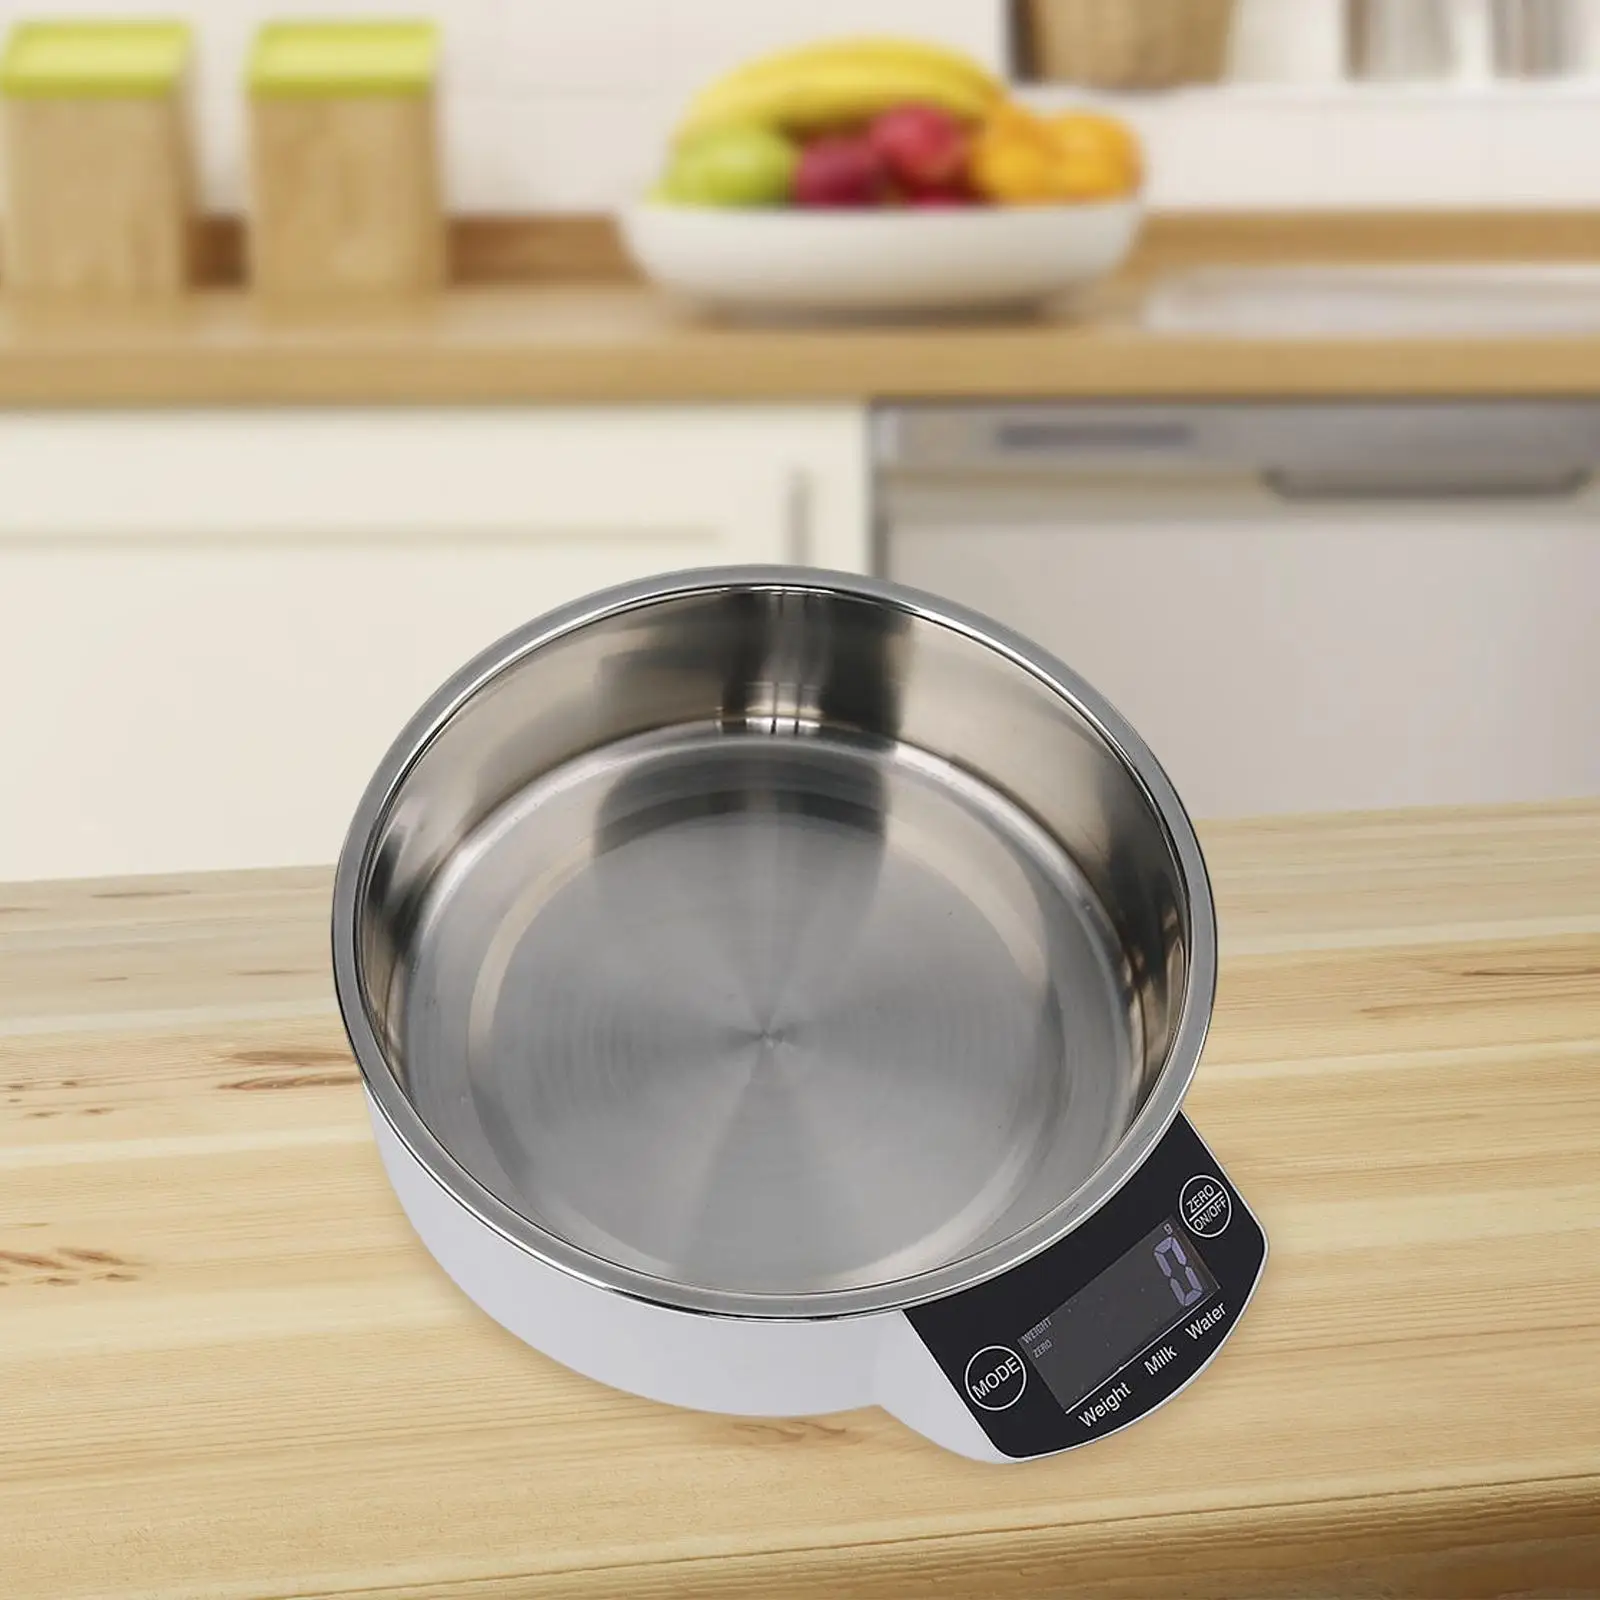 5kg/1G Food Scale with Bowl Measuring Tools Household High Precision Food Scale for Baking Dieting